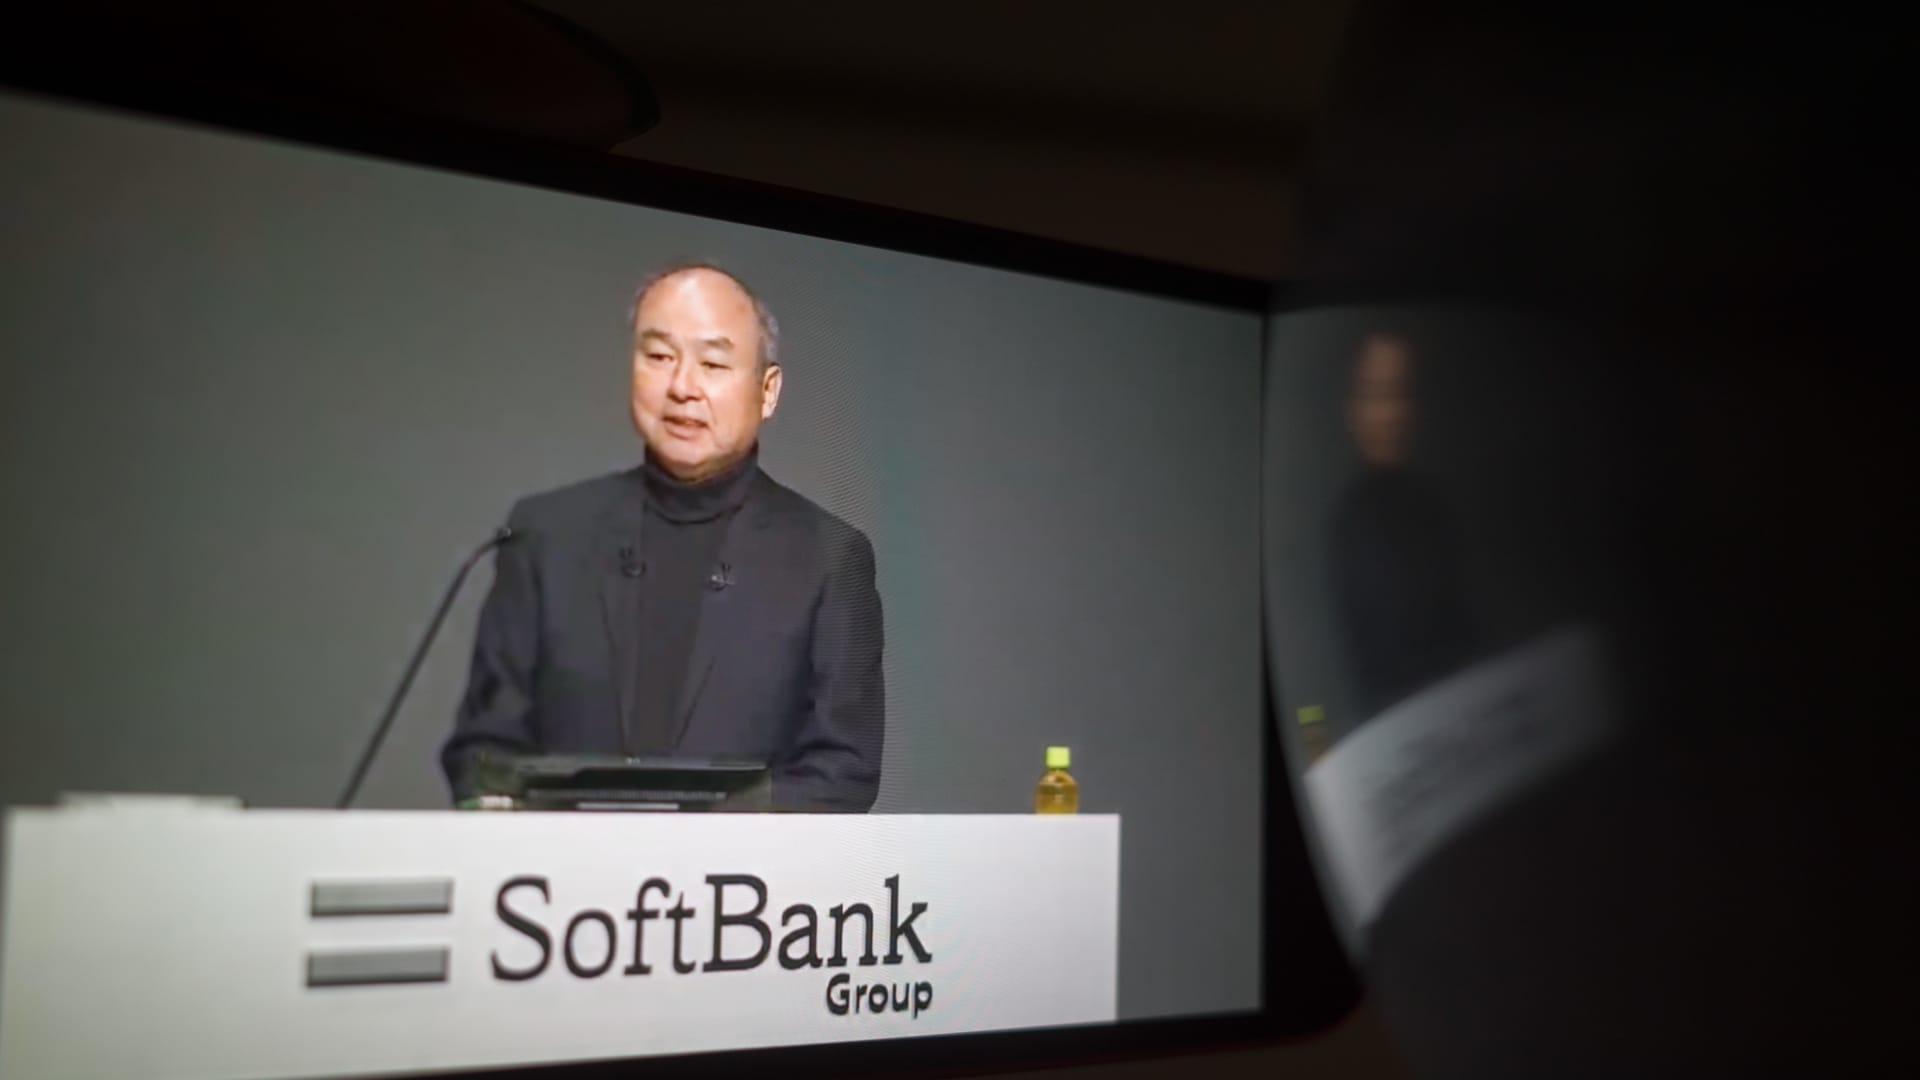 SoftBank shares extend their surge, pop more than 15% on earnings beat